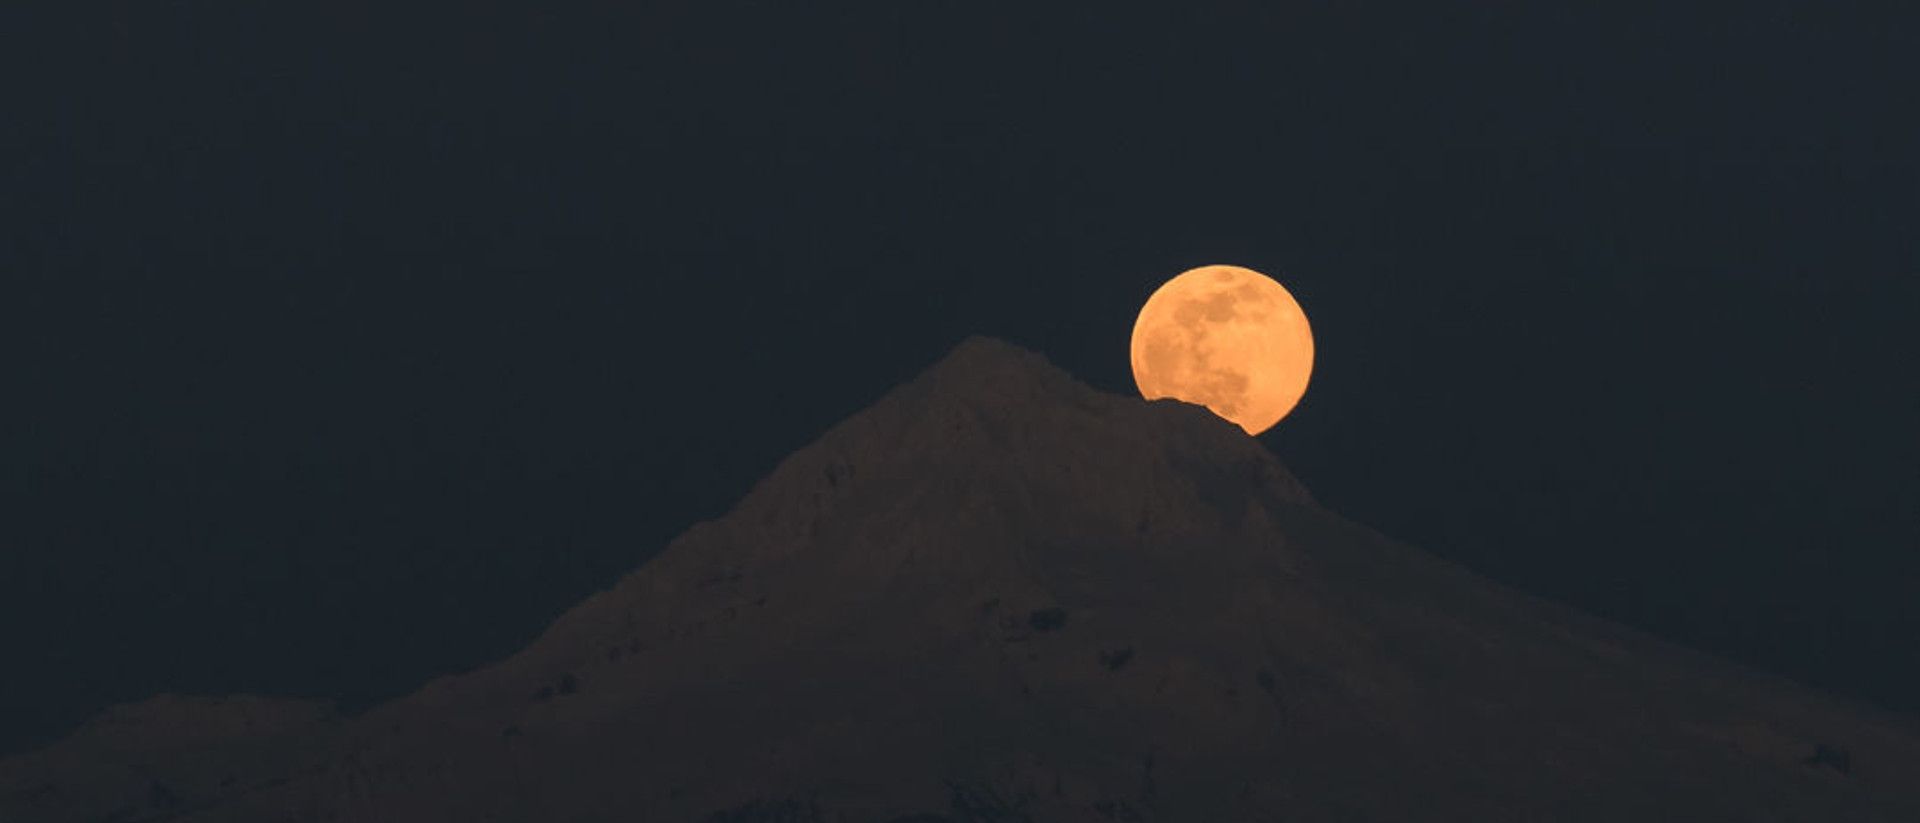 July's full buck moon will be the biggest and brightest supermoon of the year